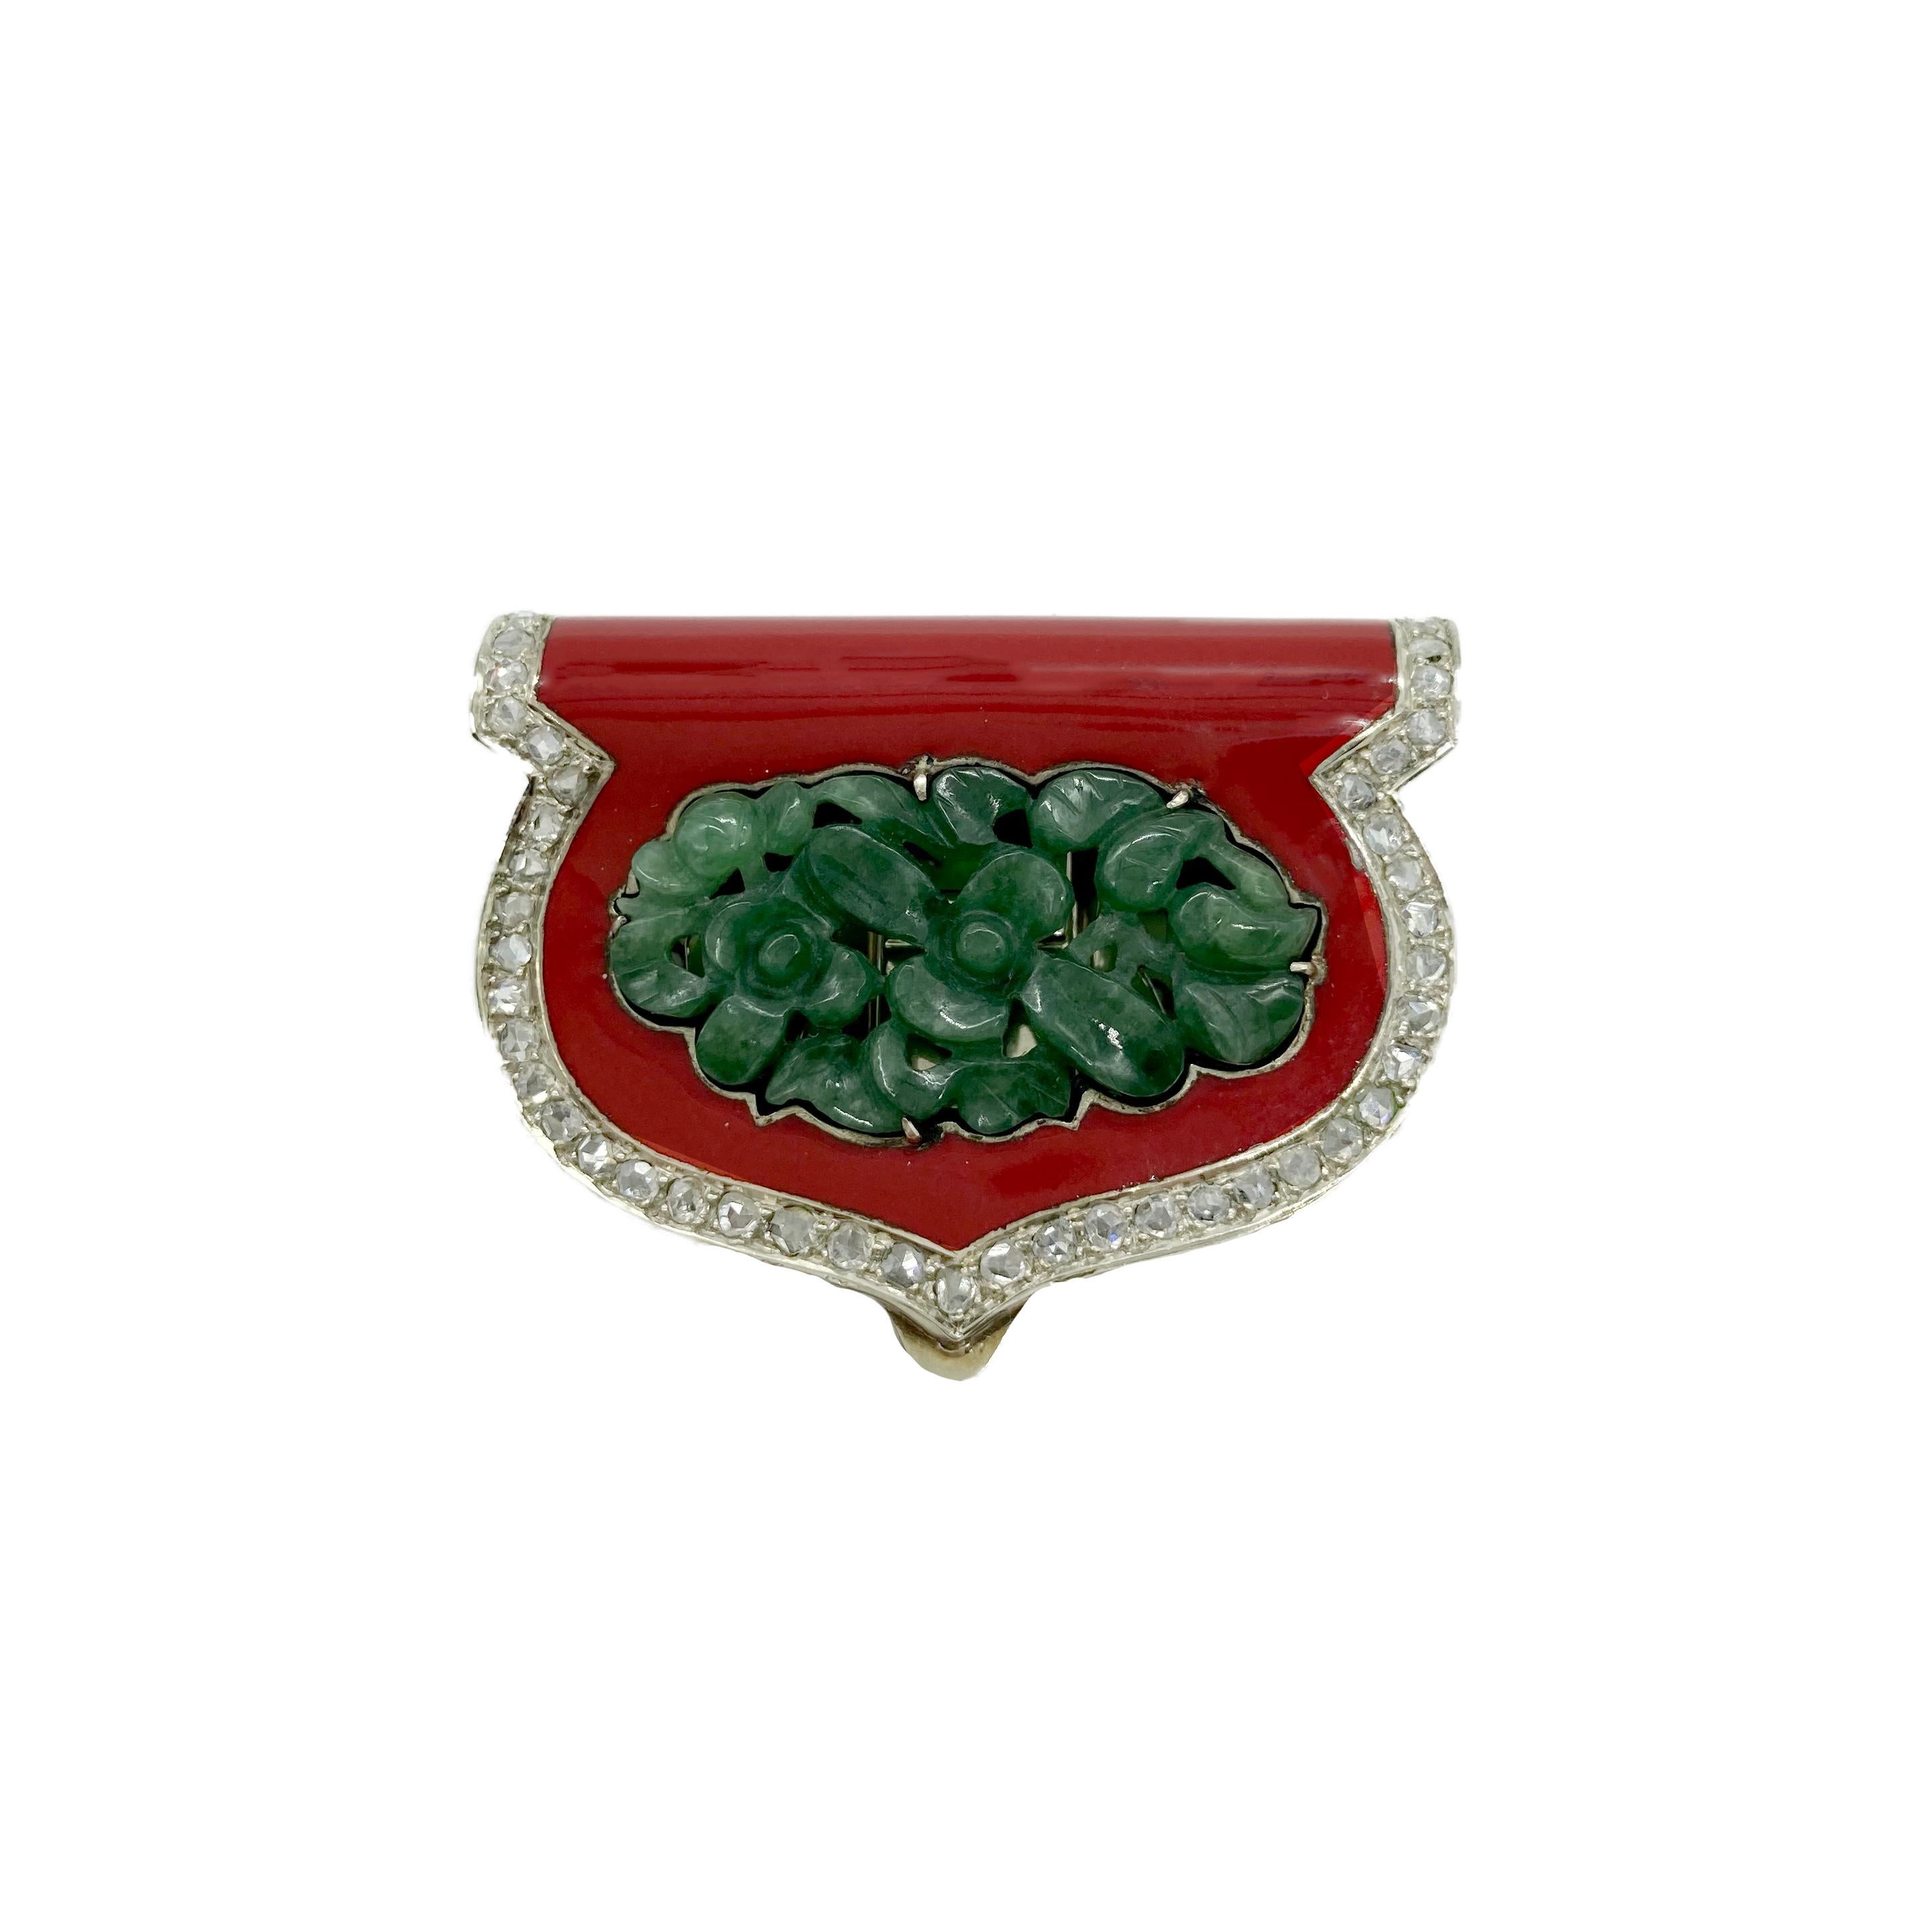 A beautiful Art Deco clip-brooch featuring carved jade, coral, and diamonds. Austria, circa 1920s.